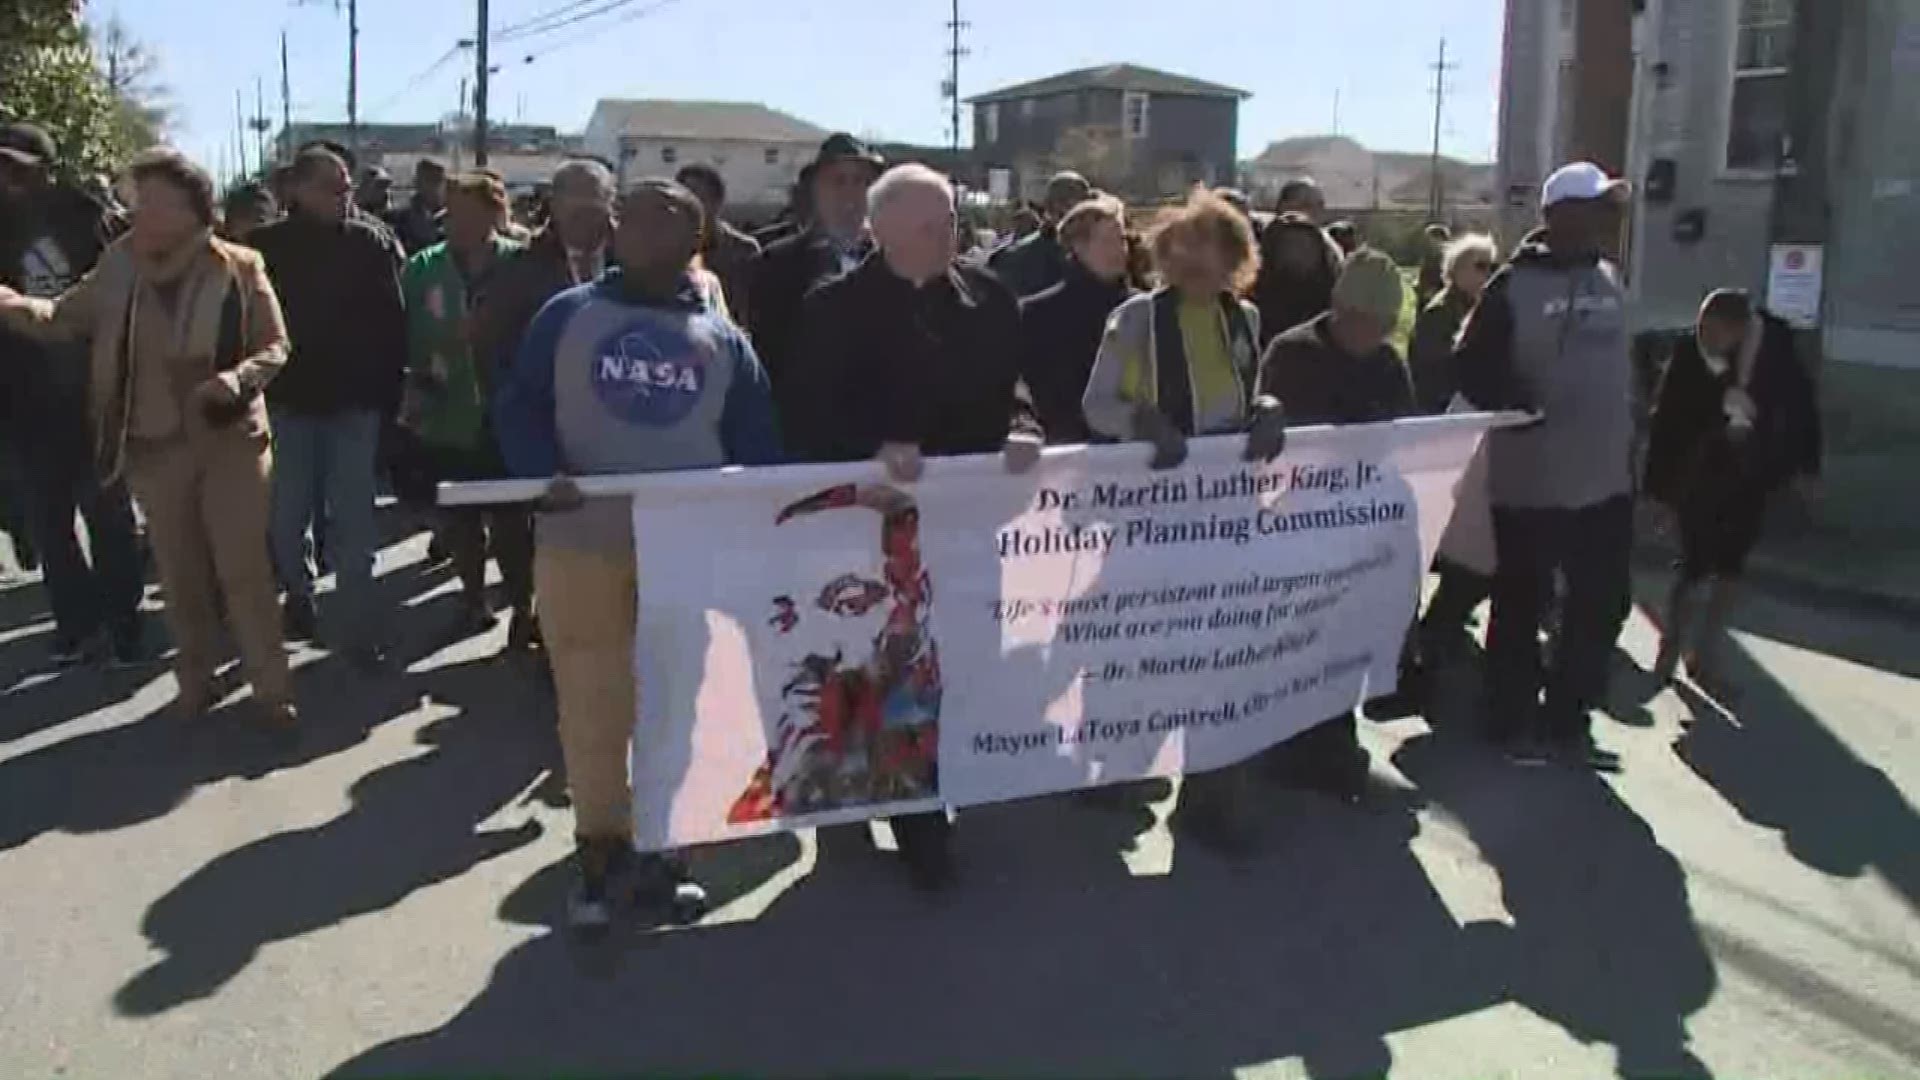 New Orleans celebrated Martin Luther King Day by doing good in the community.